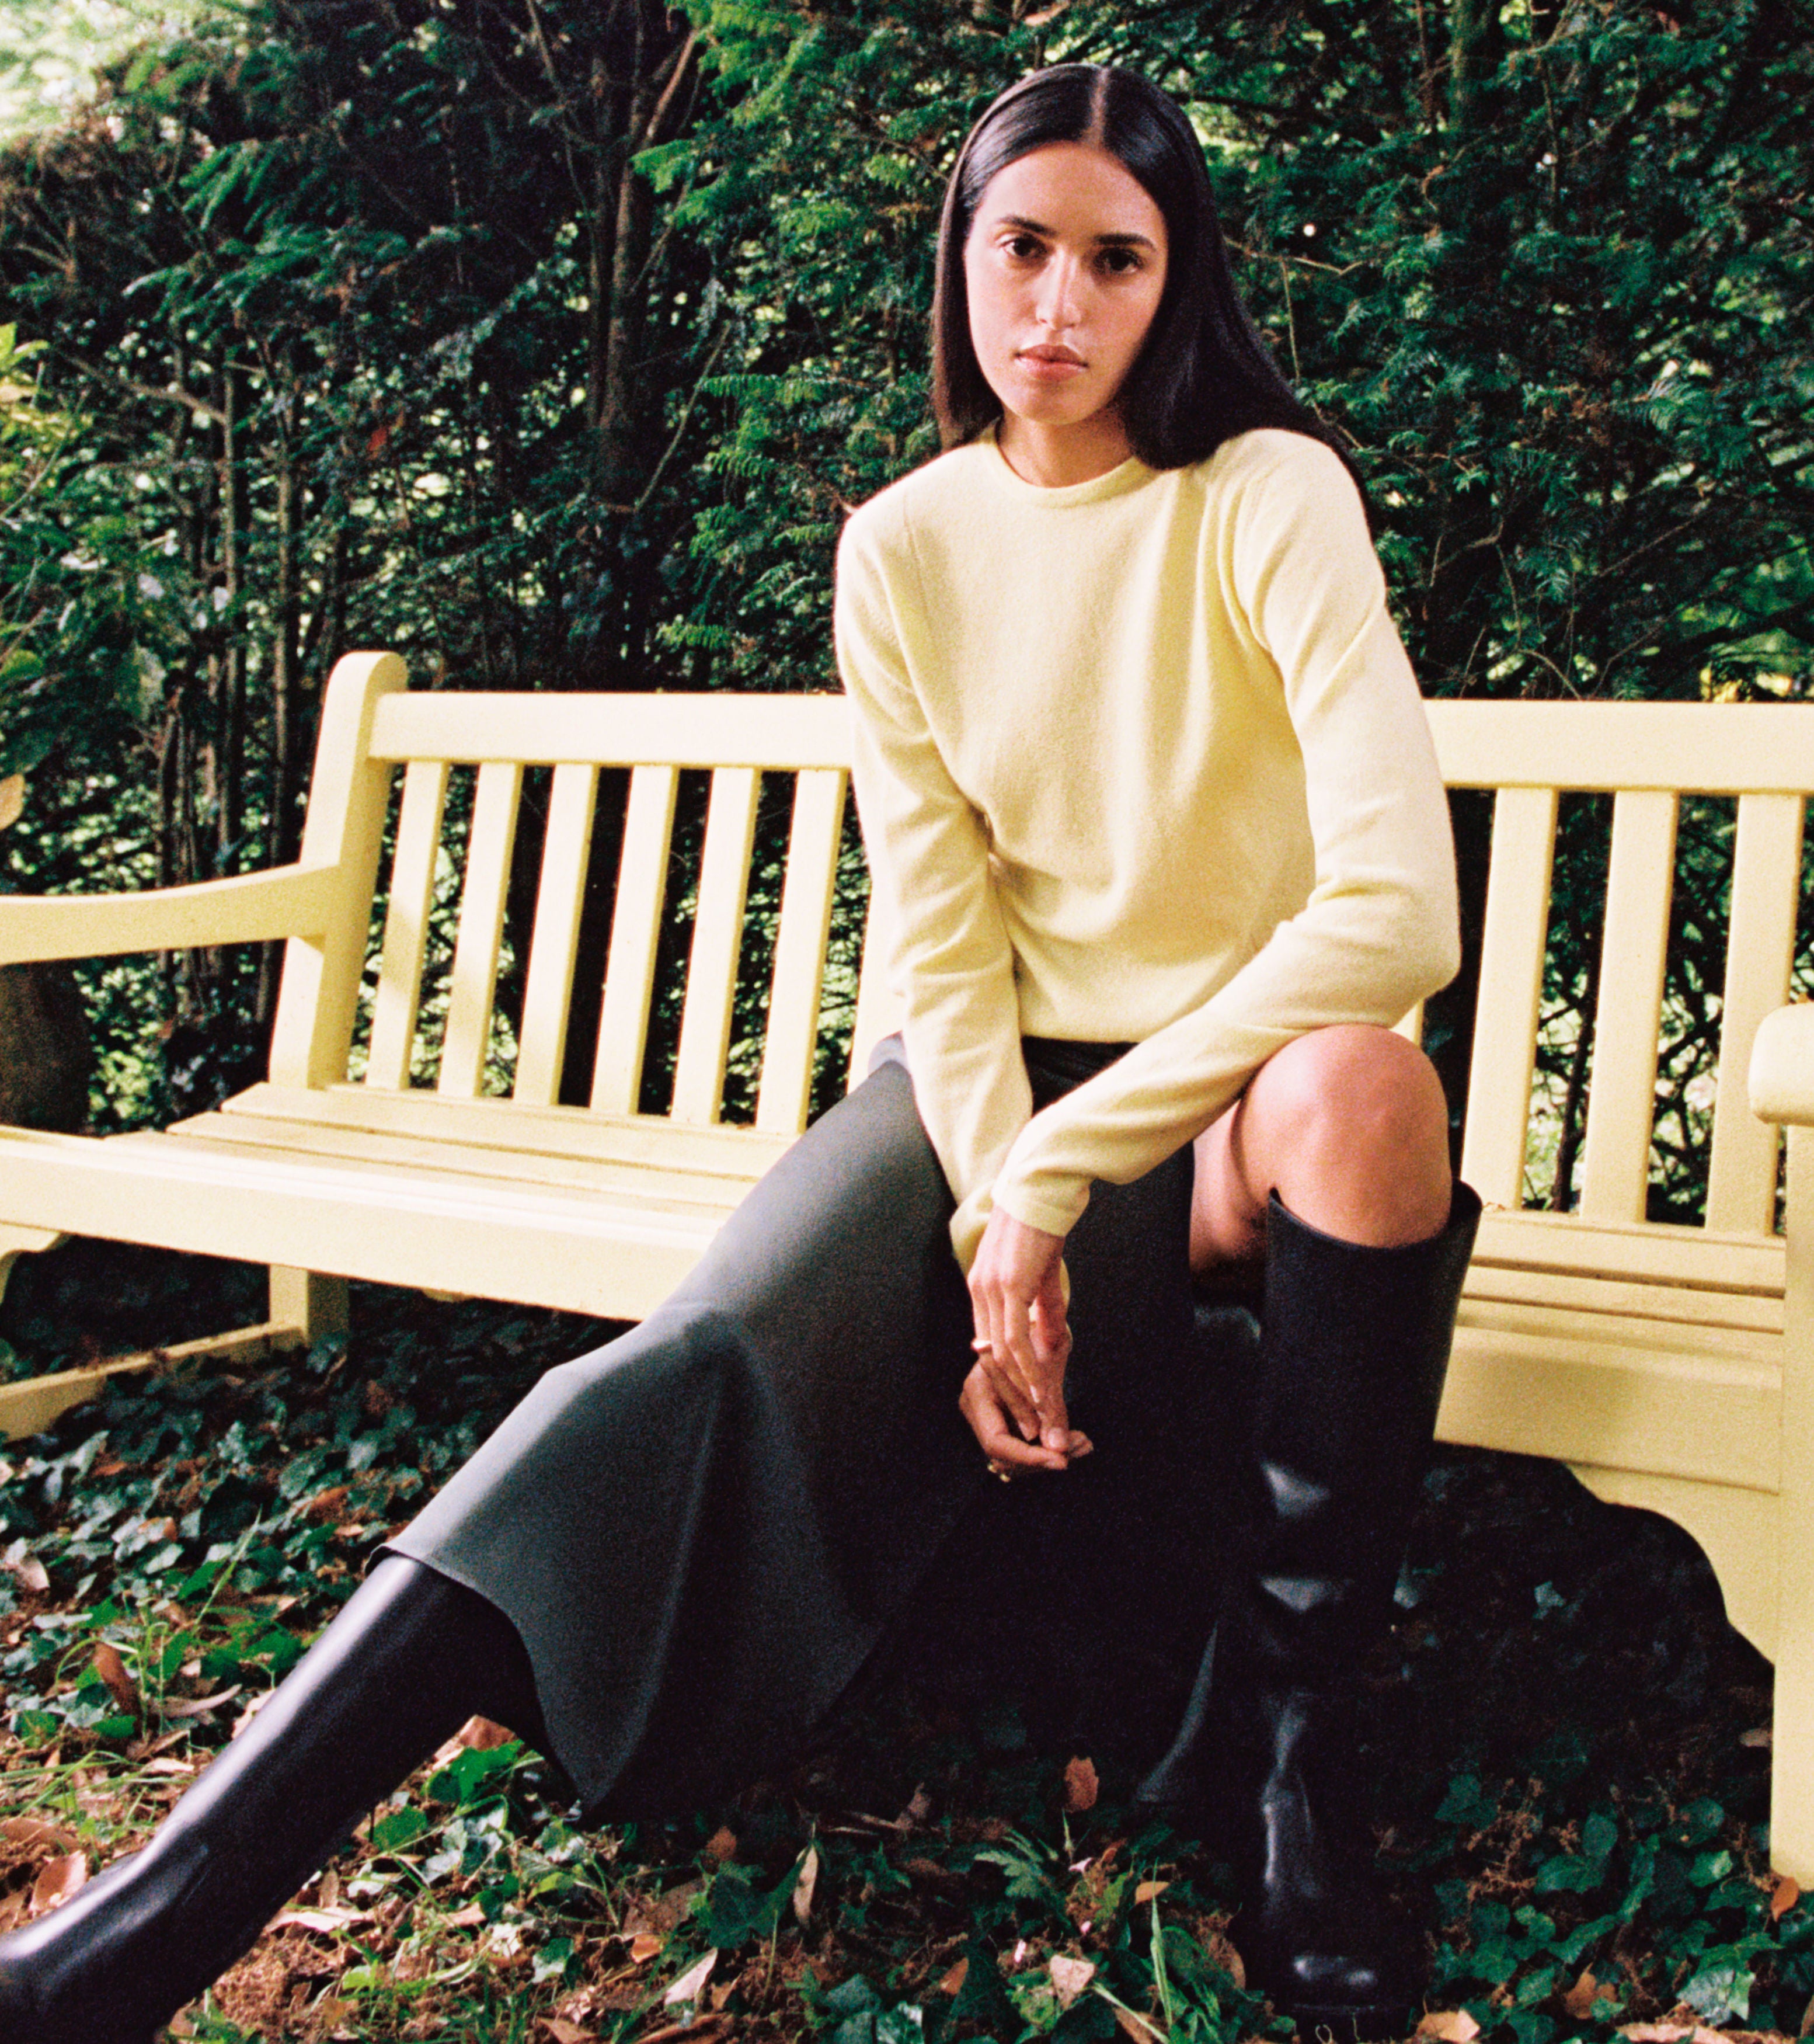 Photo issued by Yoox Net-A-Porter of a yellow cashmere jumper matching the benches at Highgrove being modelled at Highgrove House, Tetbury, Gloucestershire